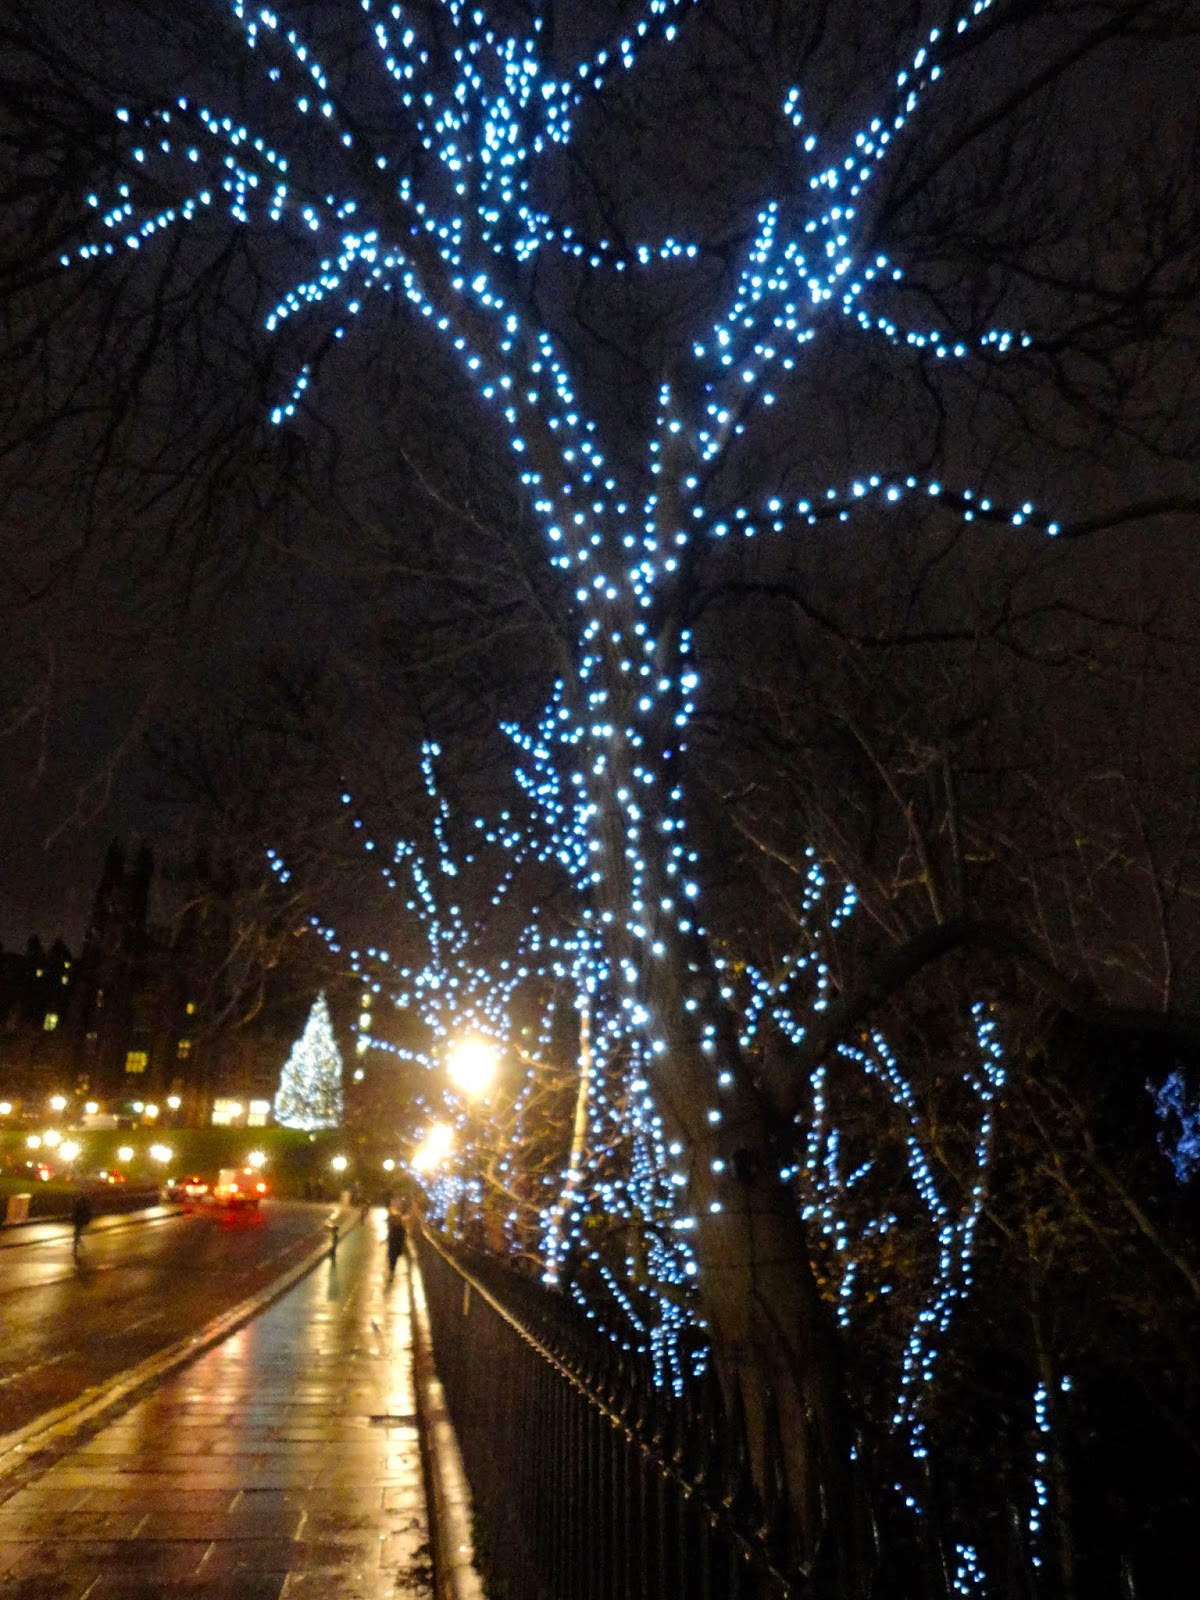 Trees decorated with lights in Edinburgh's Princes Street Gardens